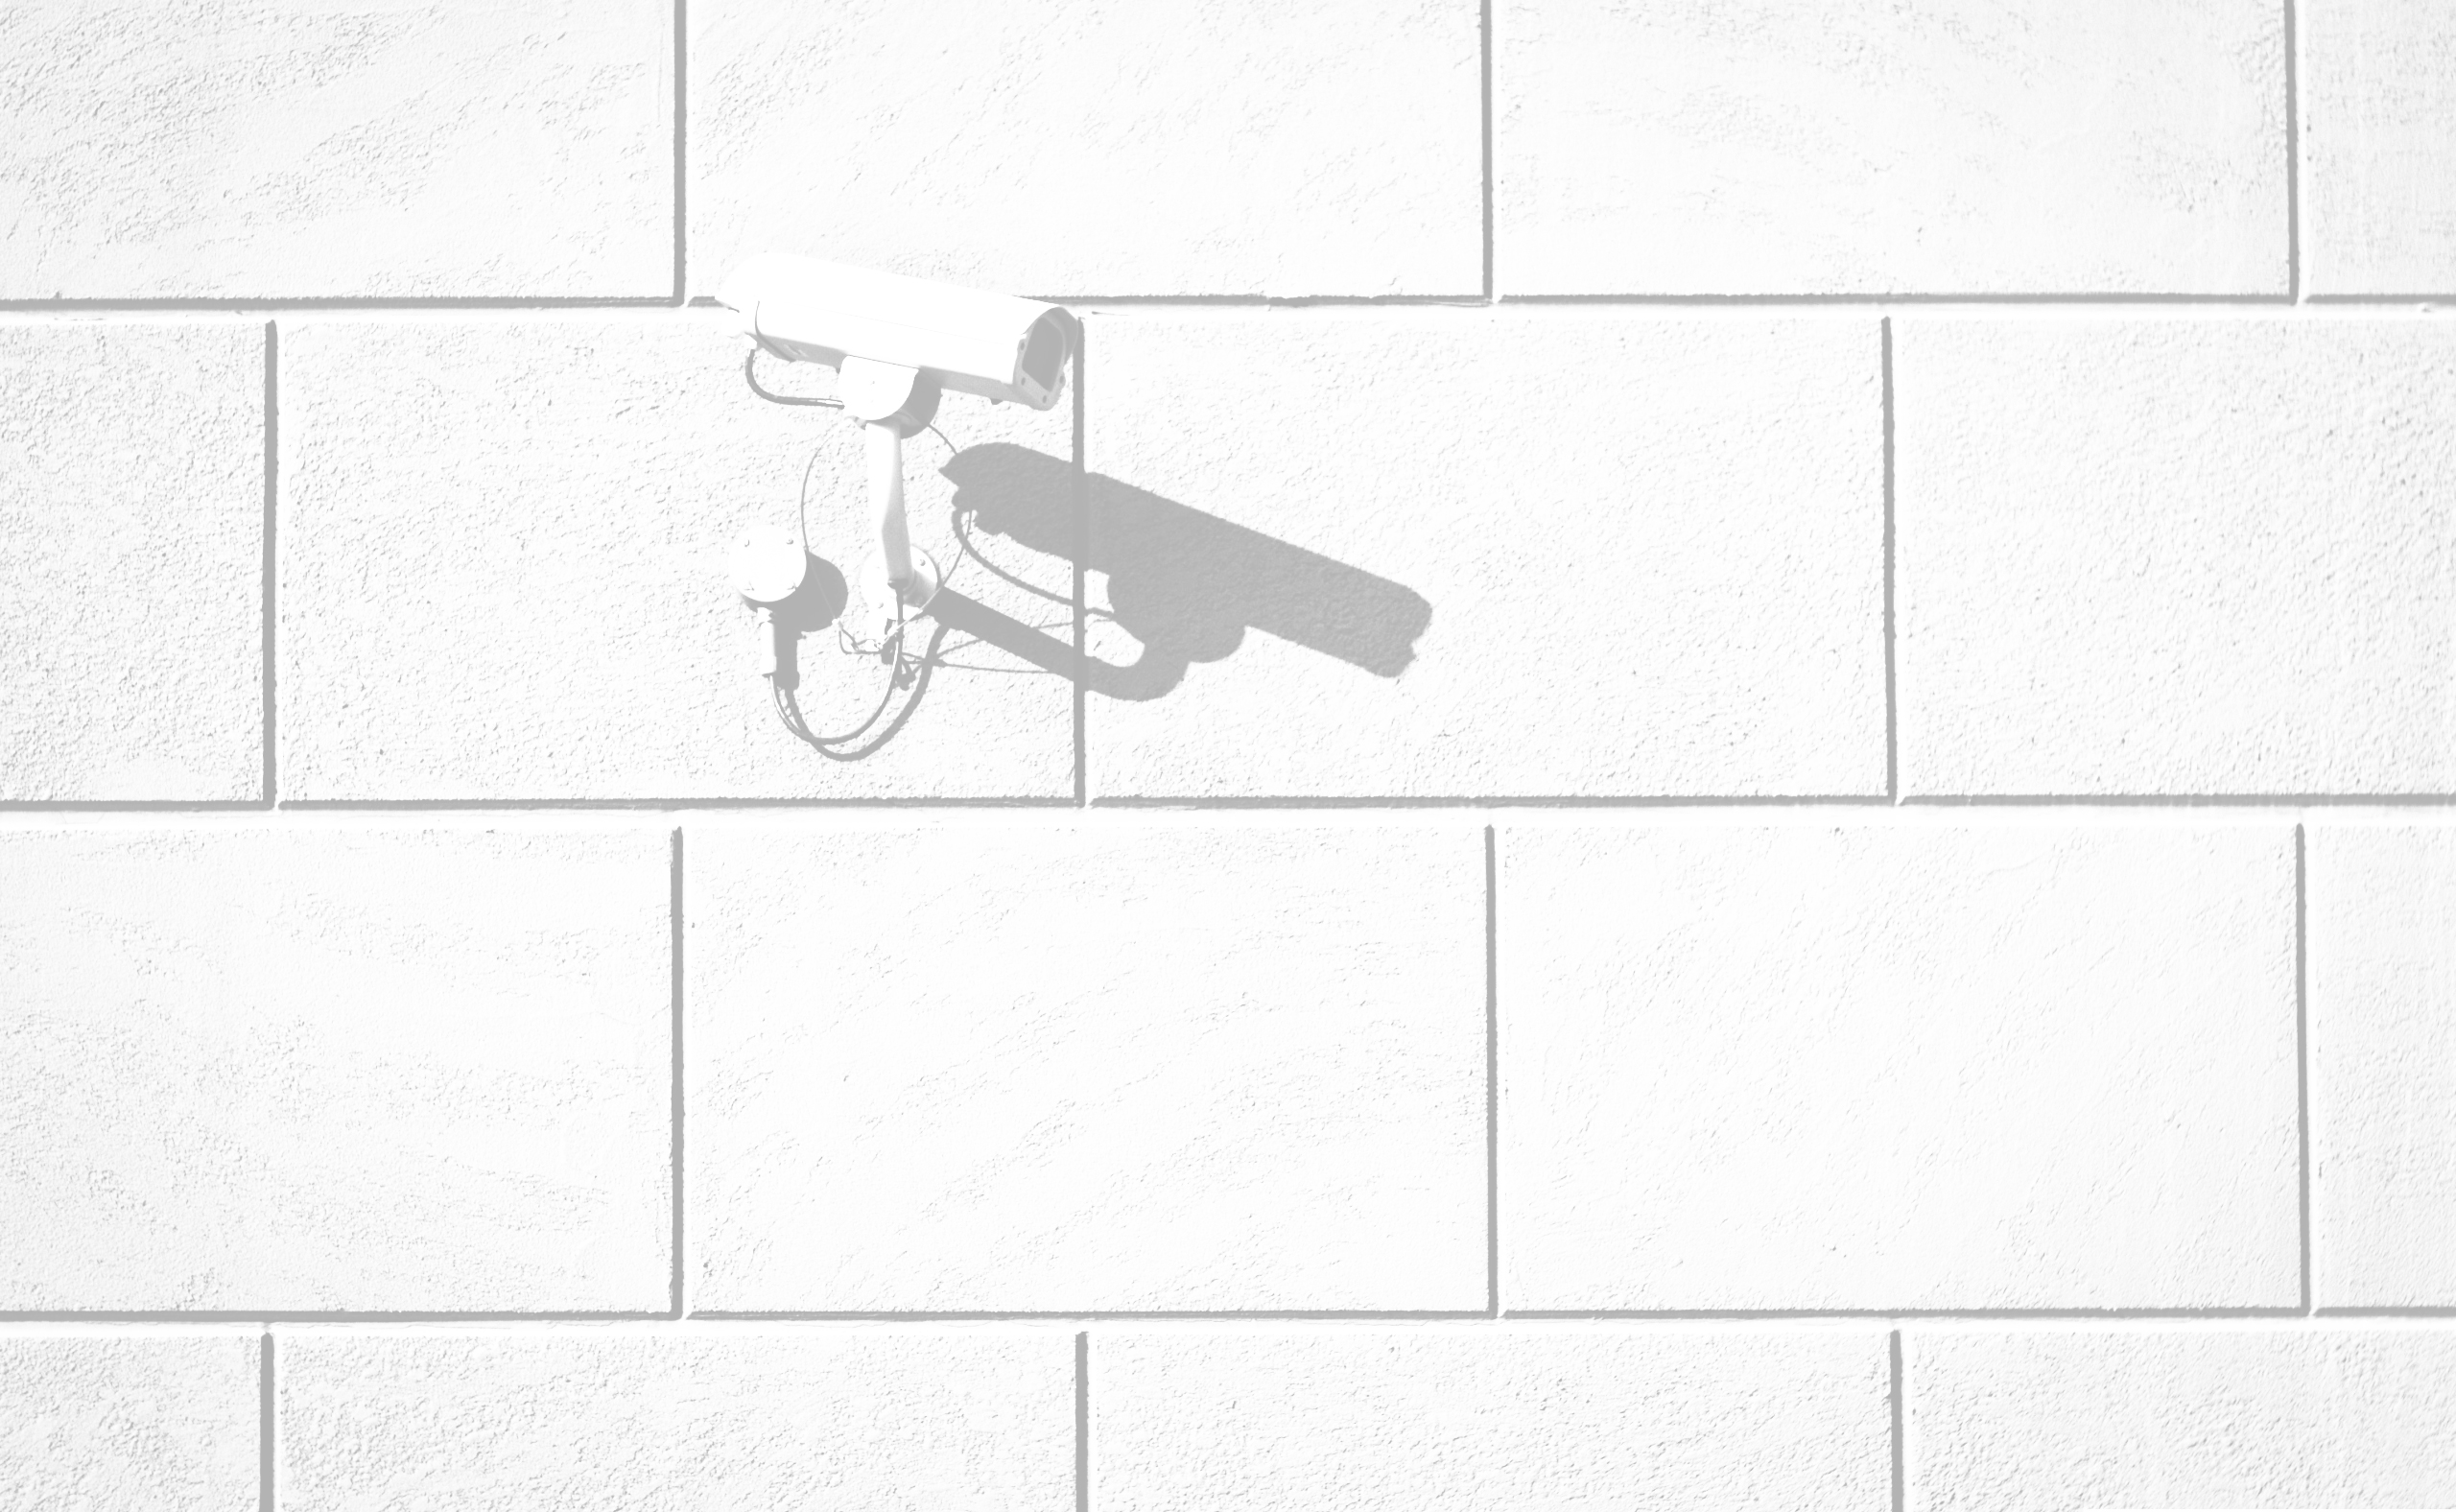 Security Camera Installed on a Wall